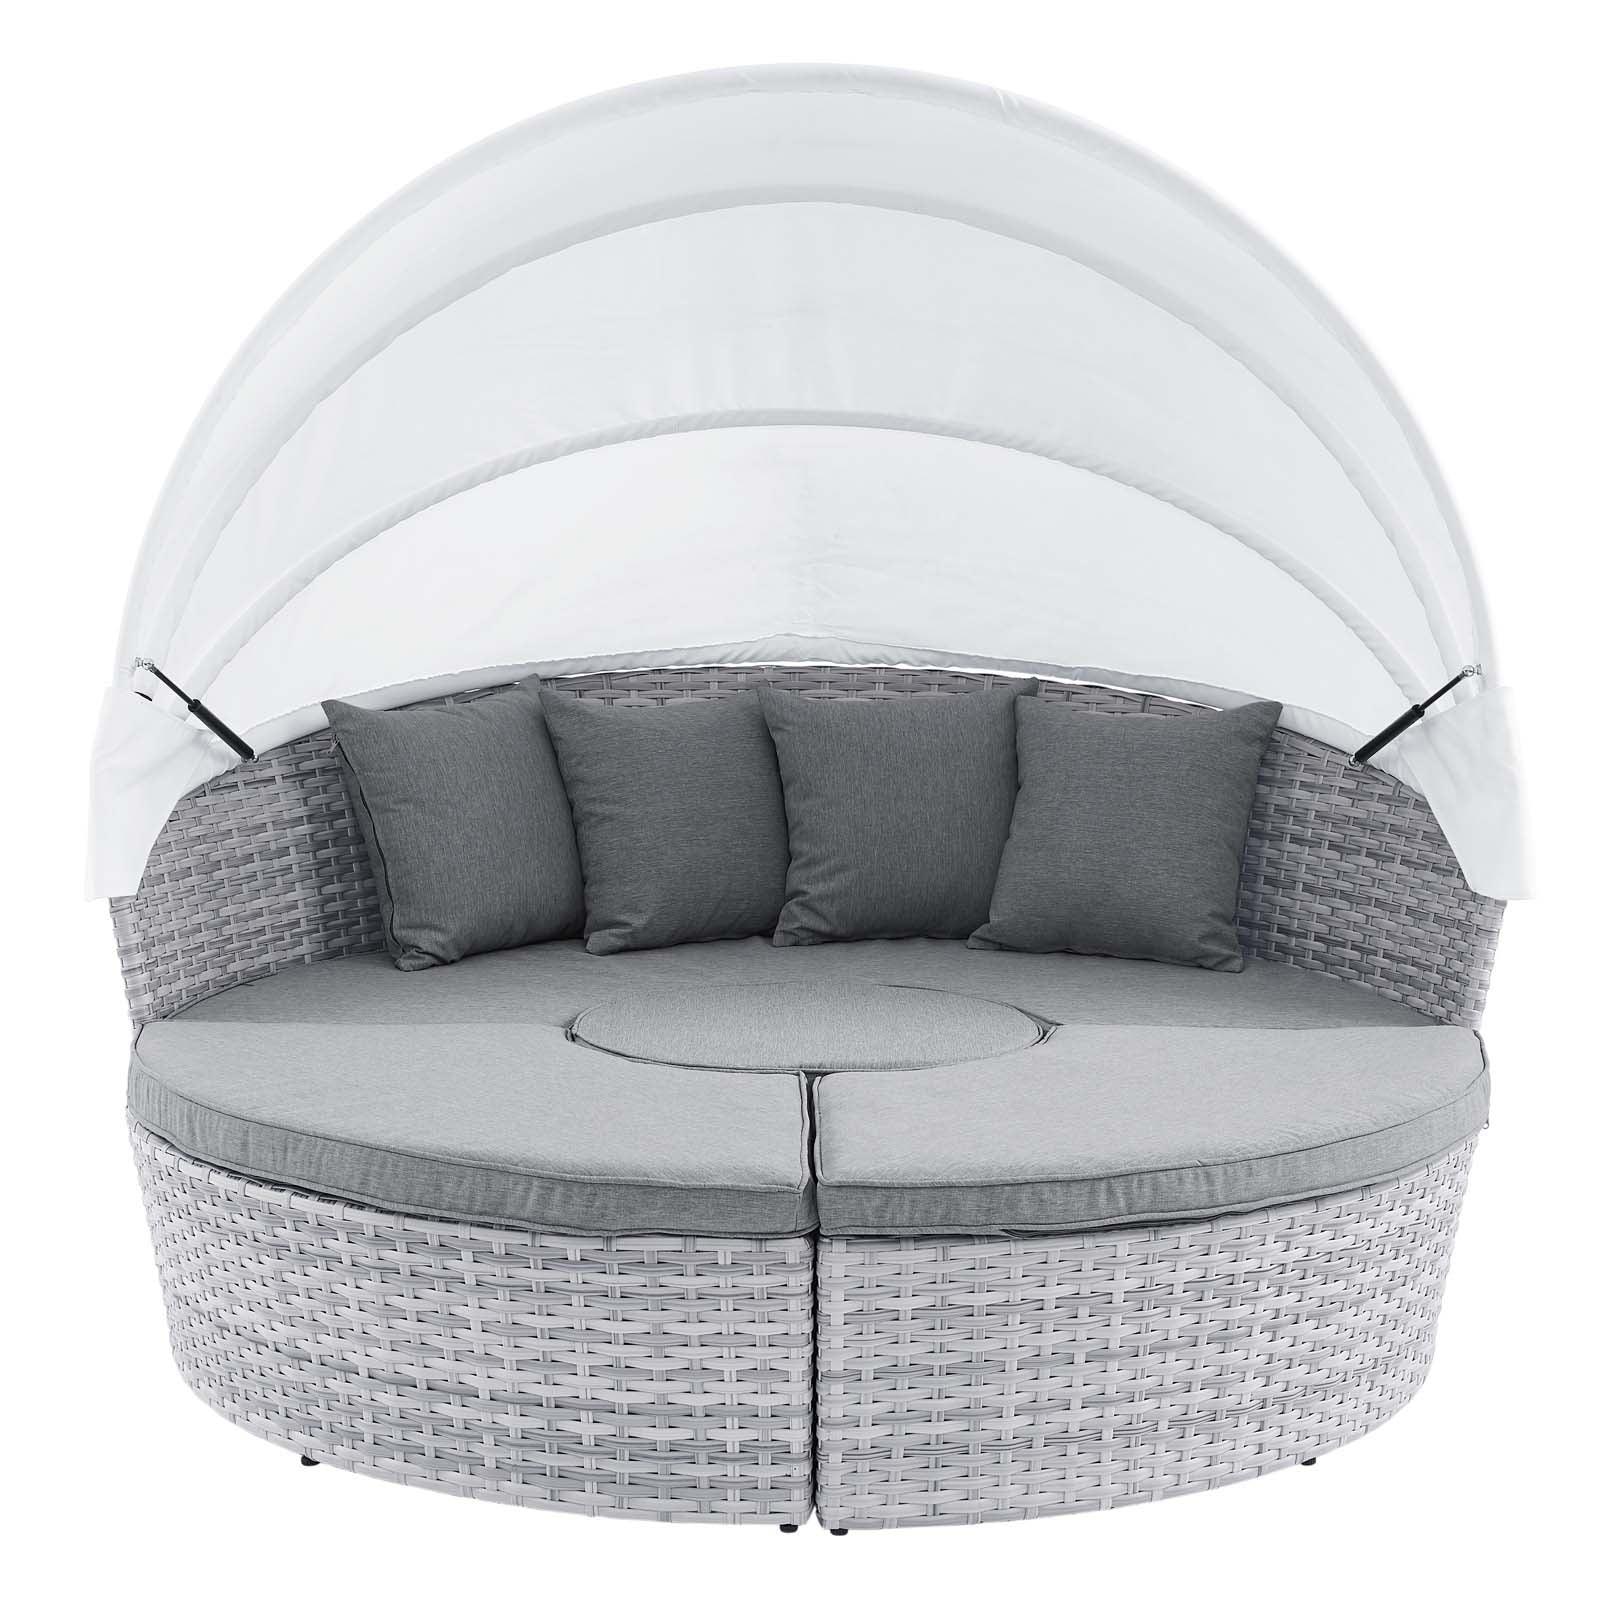 Modway Scottsdale Canopy Outdoor Patio Daybed FredCo